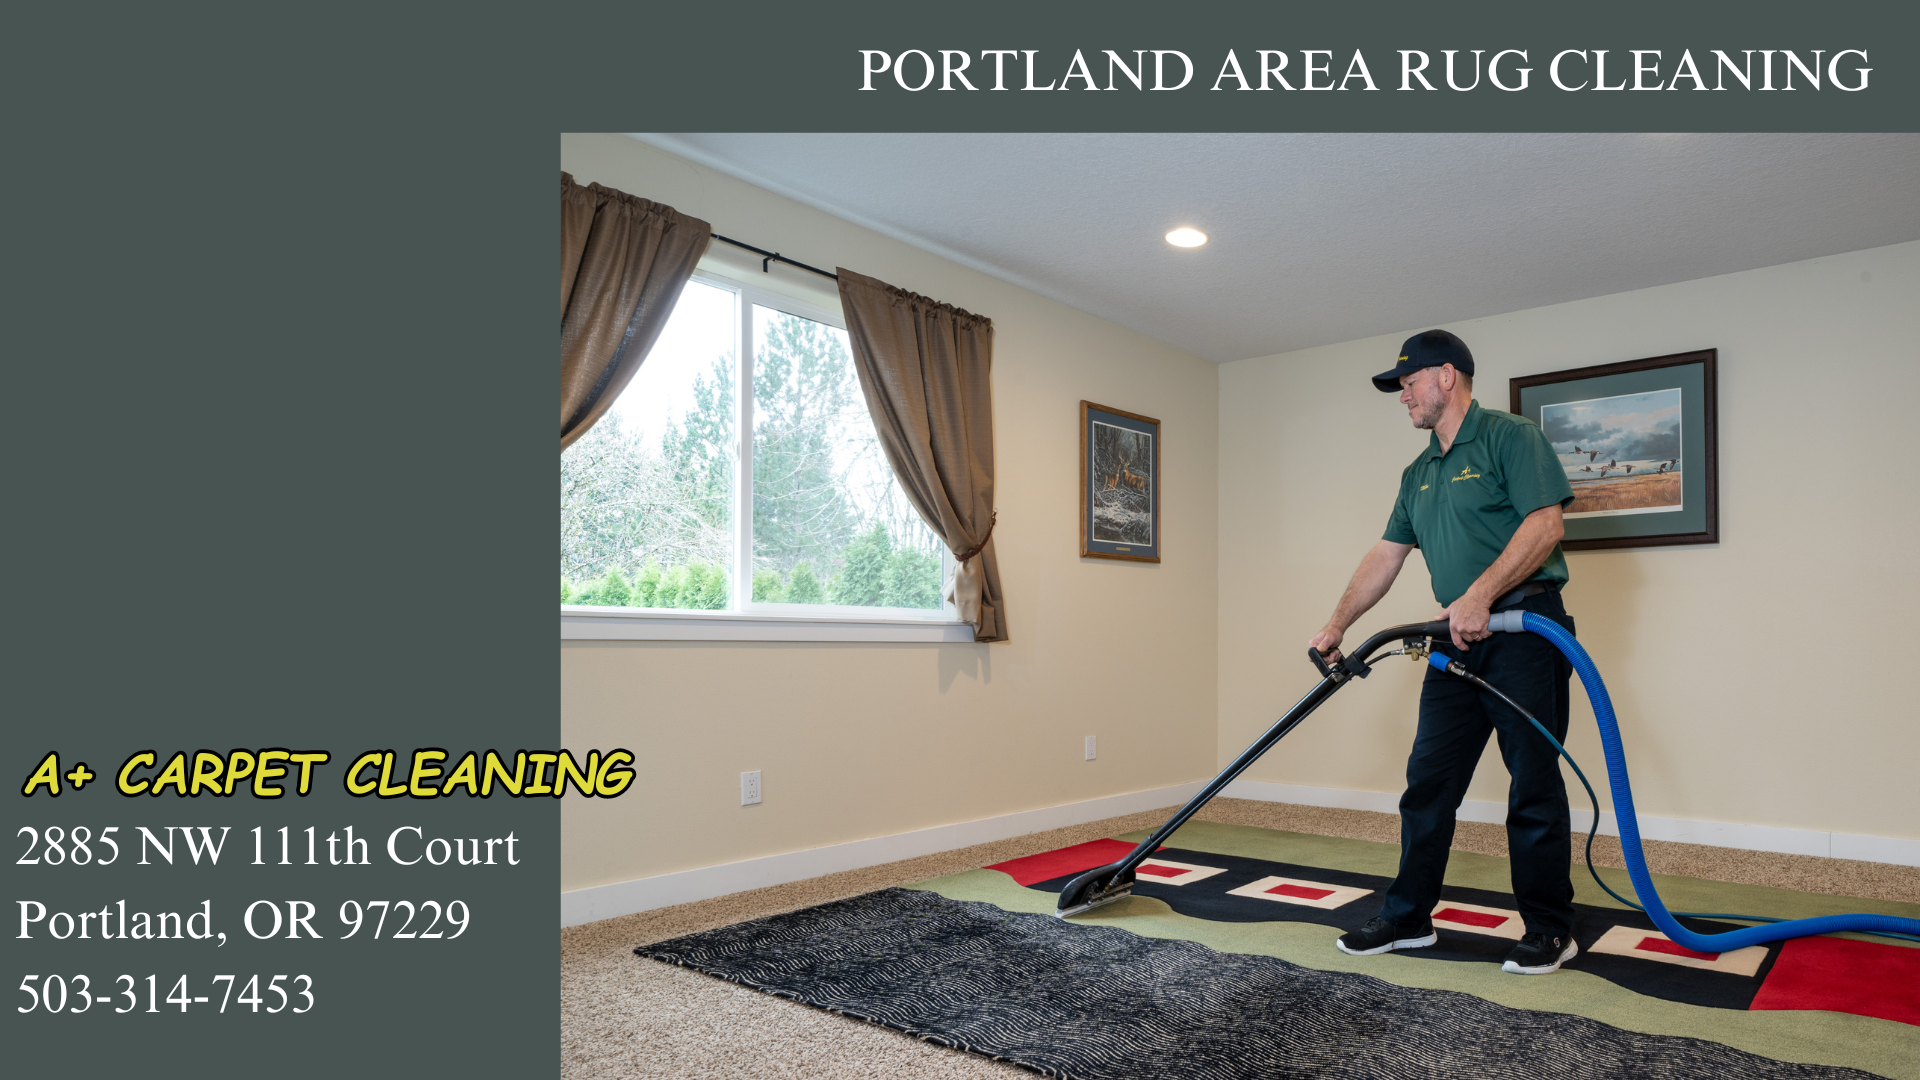 Portland area rug cleaning